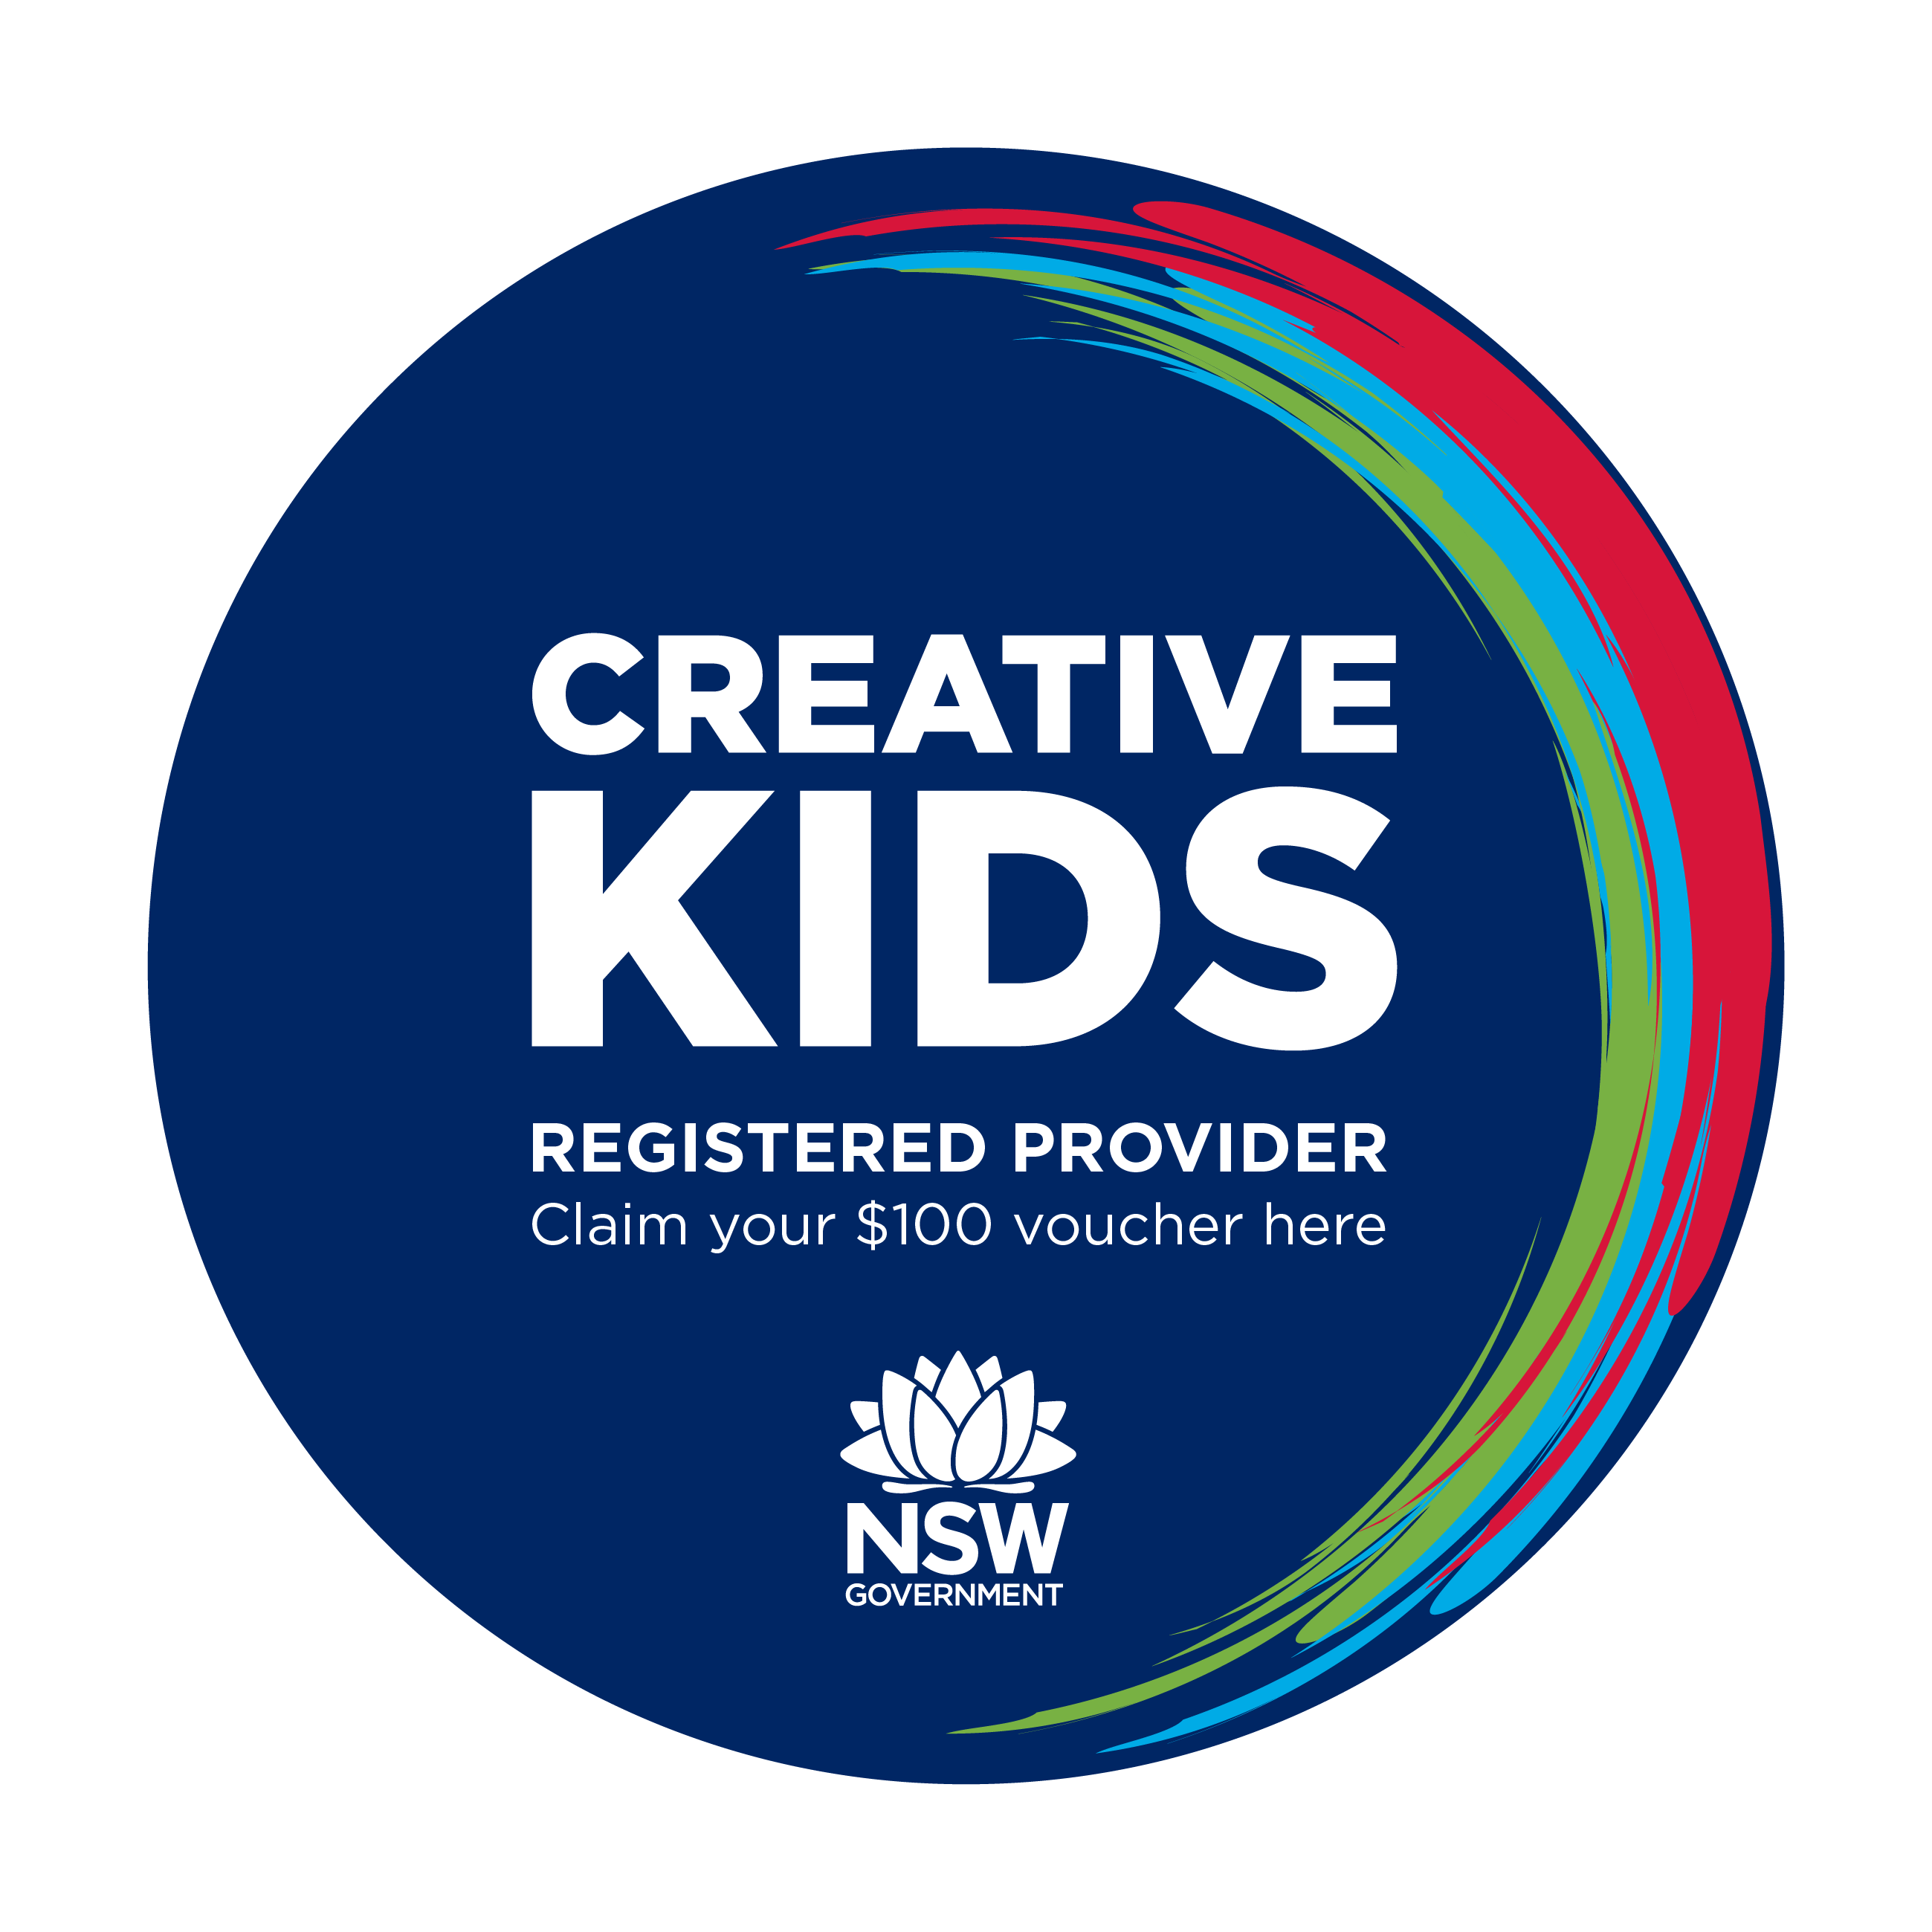 Little Canvas is Creative Kids Registered